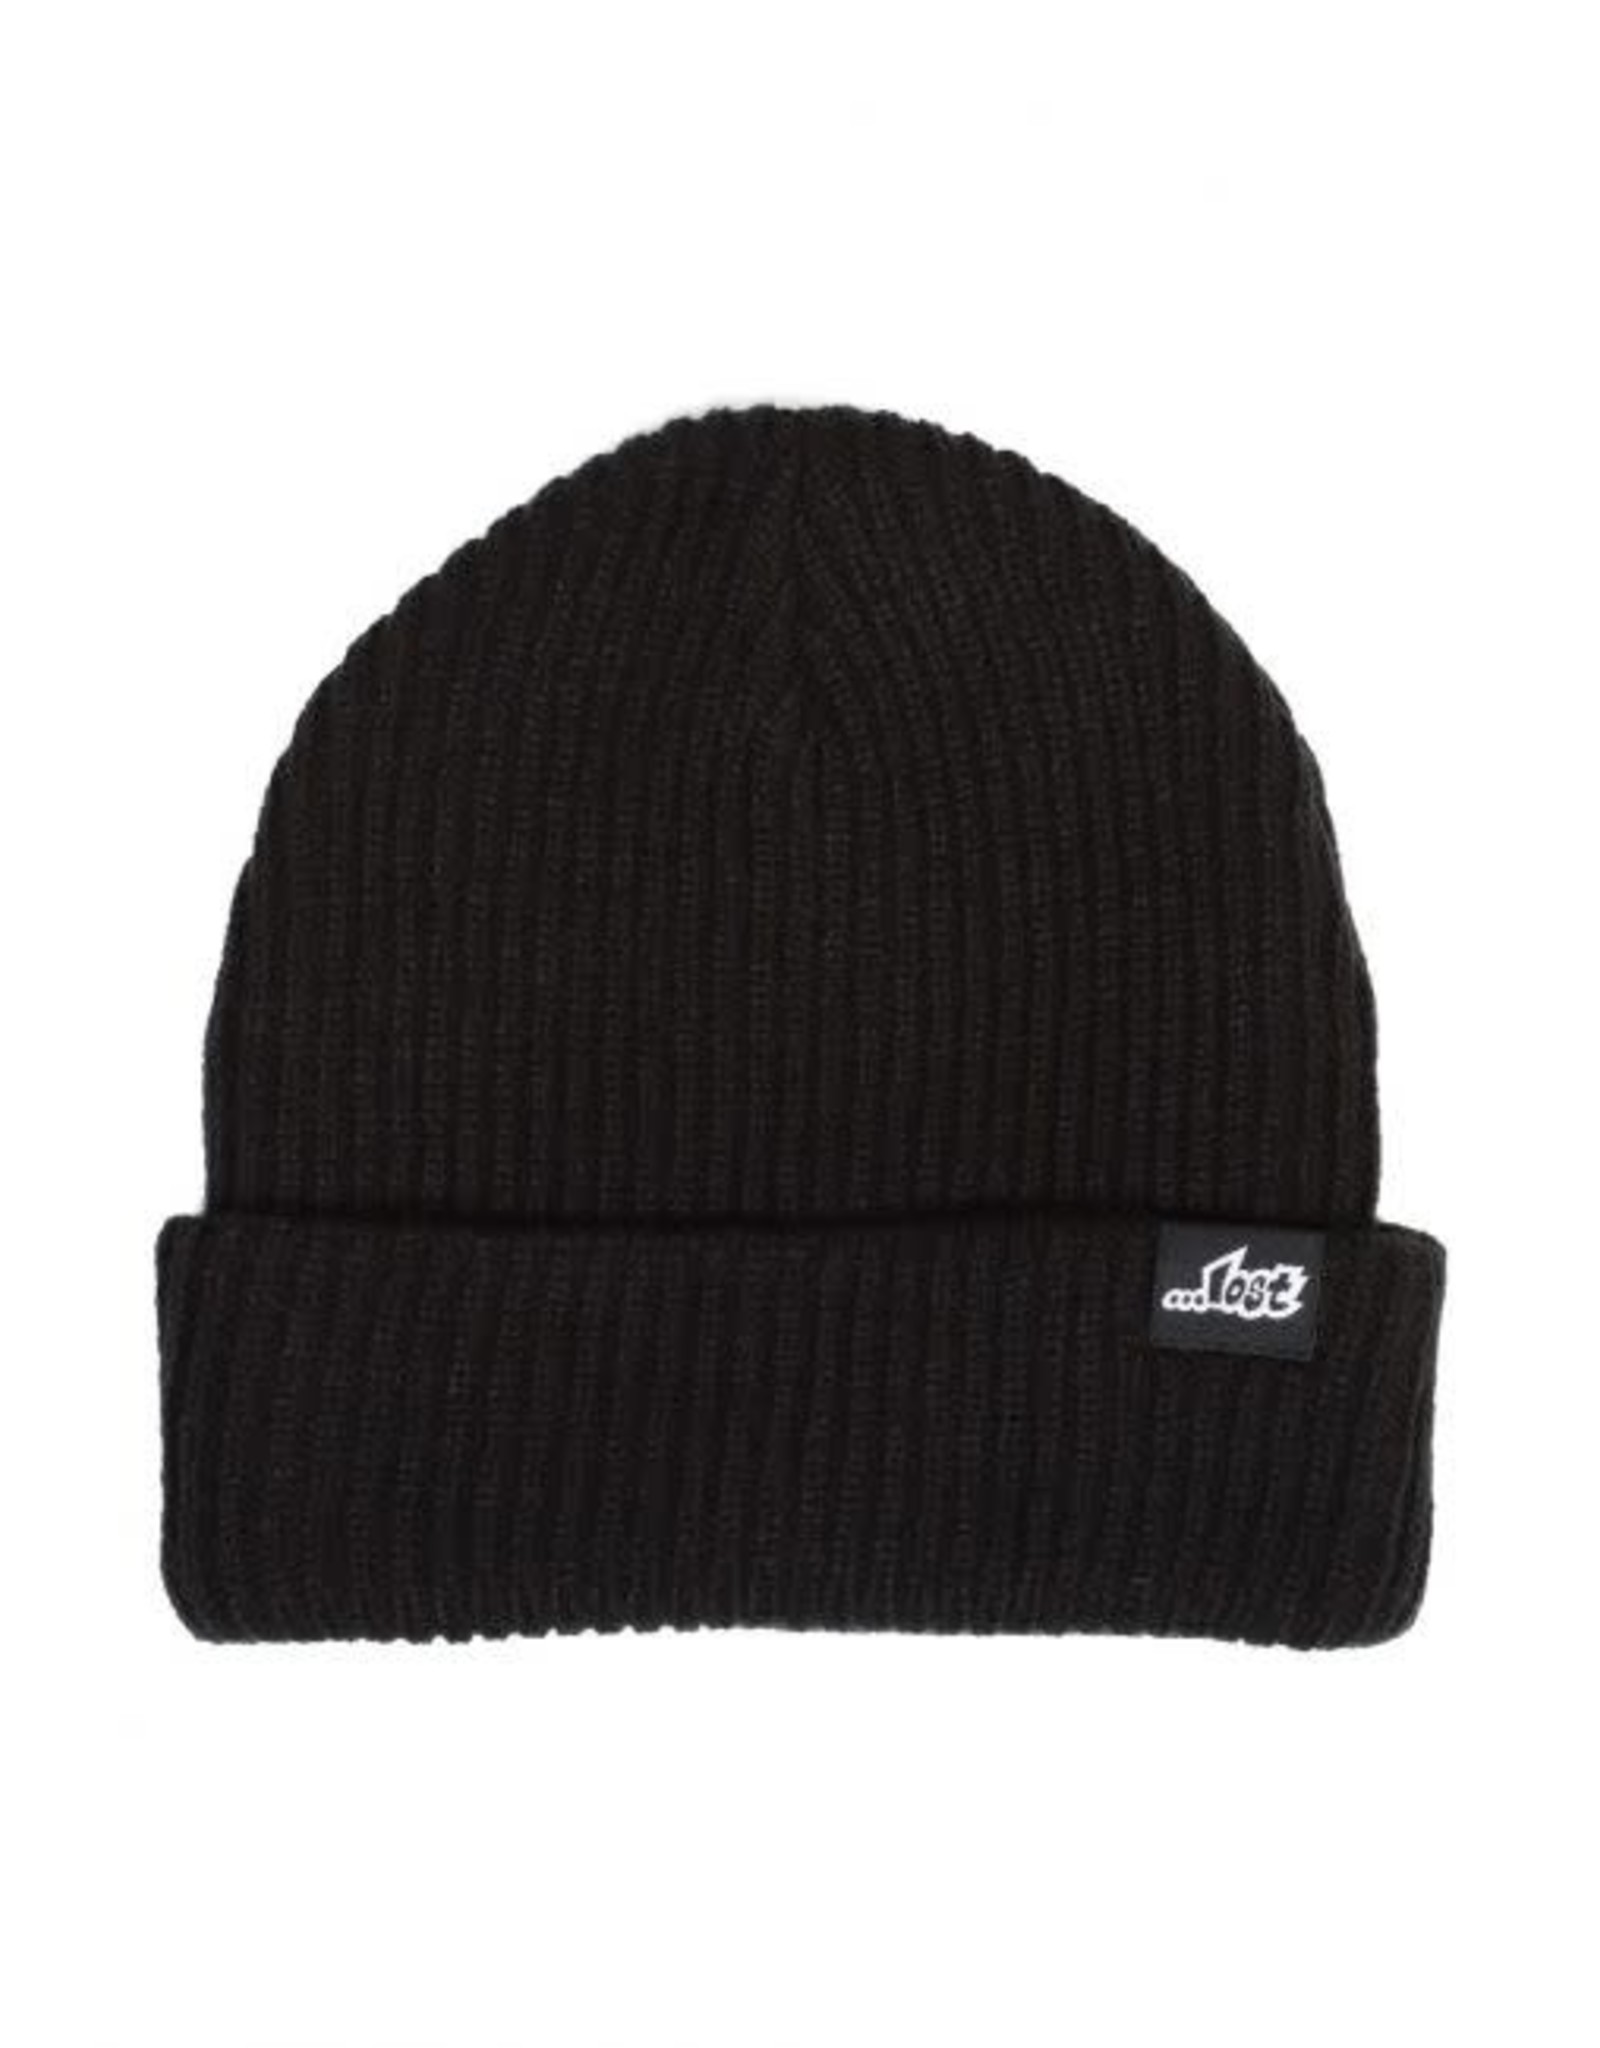 Lost Lost Swell Beanie Black